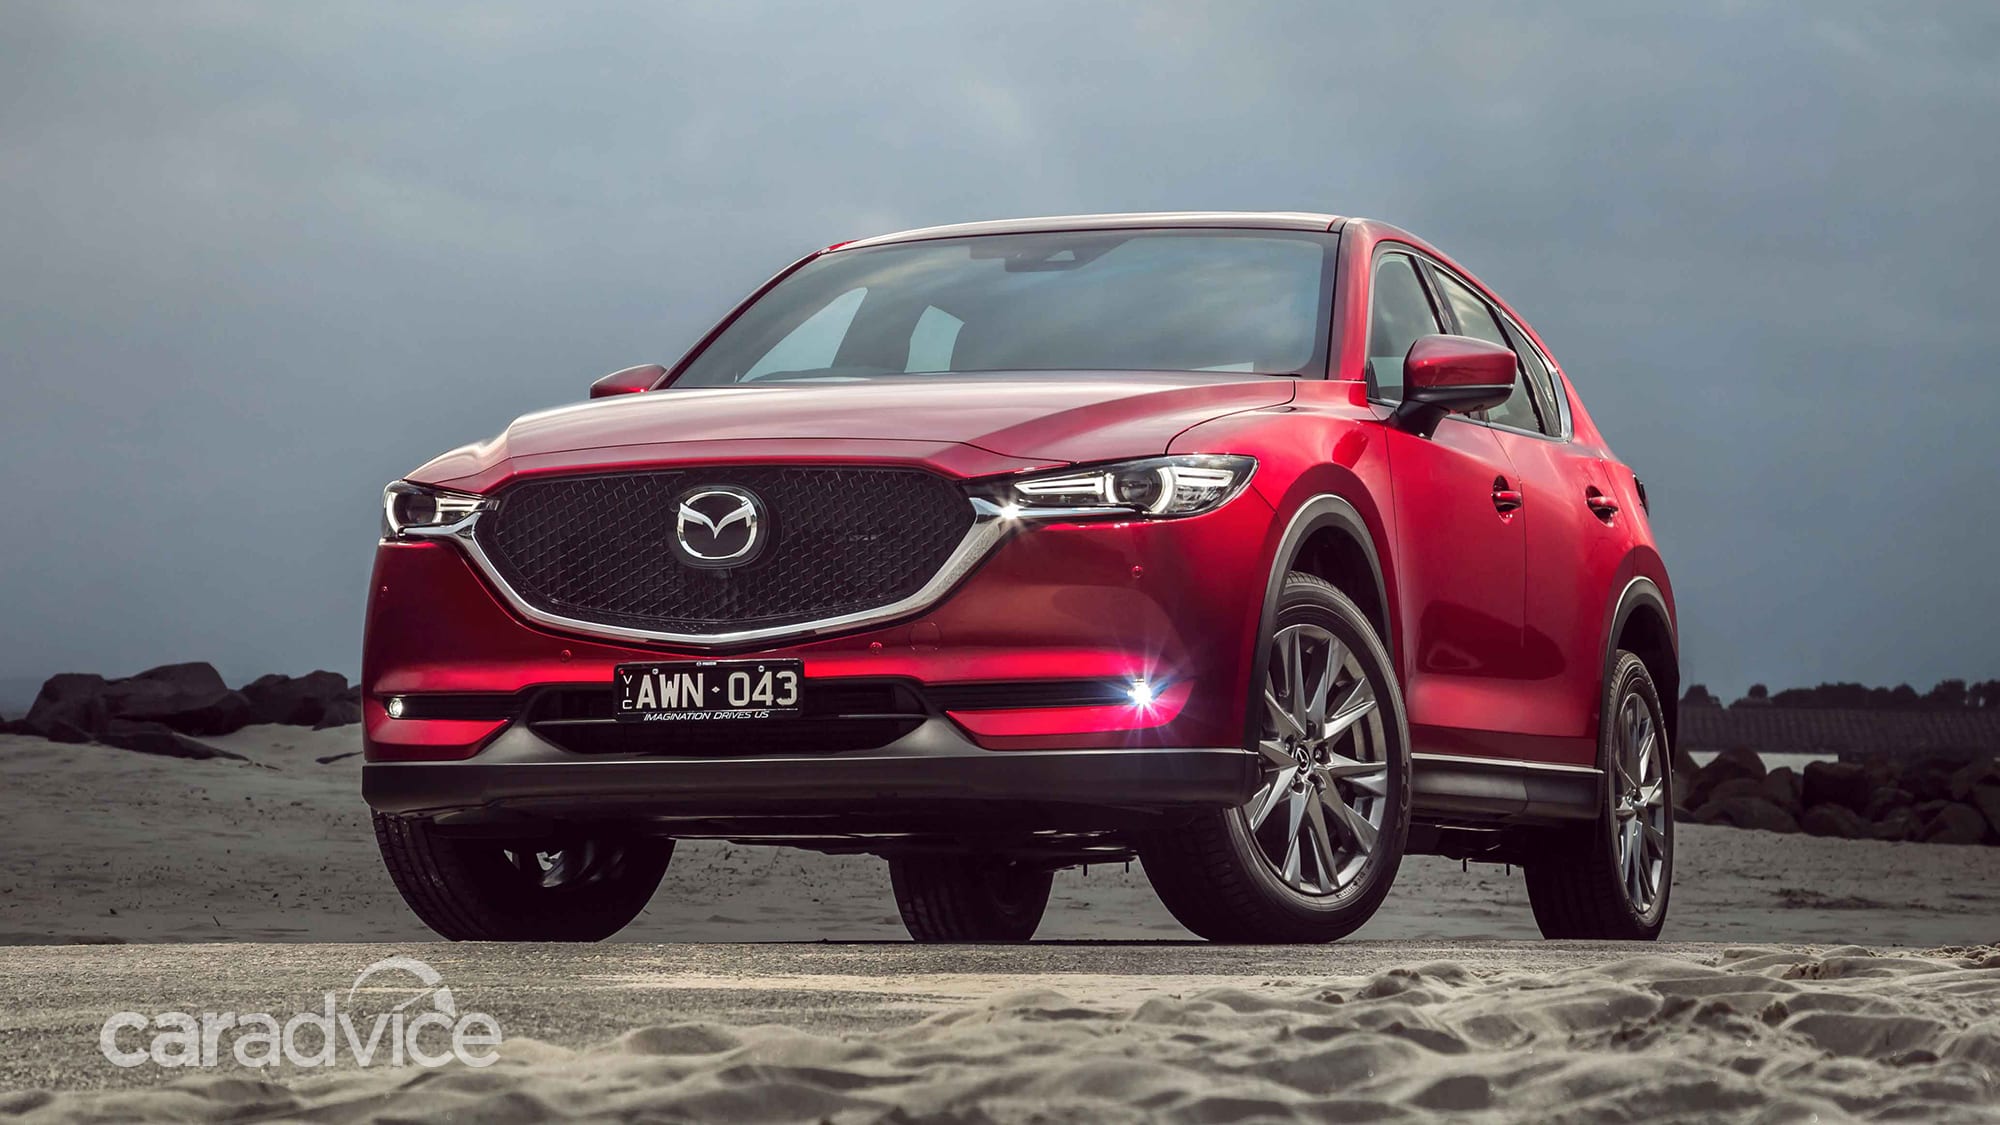 2019 Mazda Cx 5 Pricing And Specs Turbo Petrol Flagship Arrives